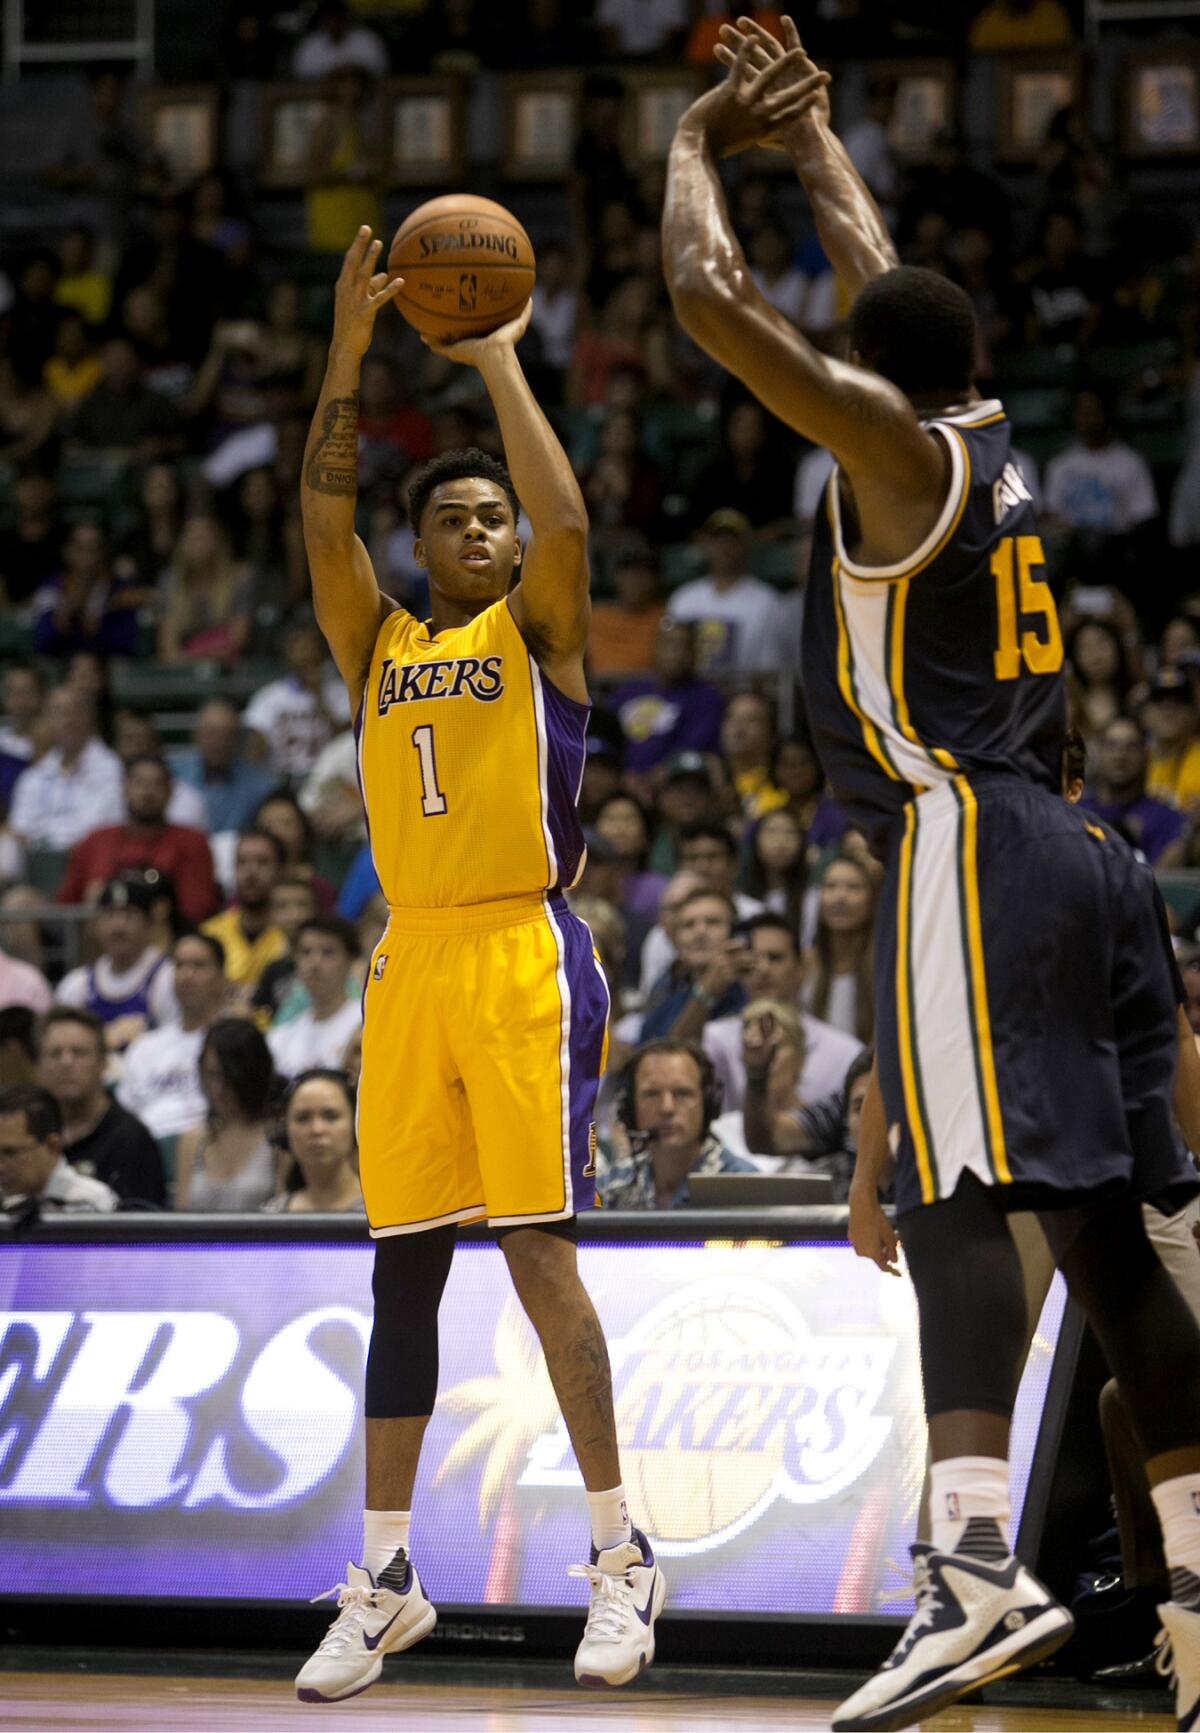 Los Angeles Lakers guard D'Angelo Russell (1) attempts a shot over Utah Jazz forward Derrick Favors (15) during the first quarter of a preseason NBA basketball game on Sunday in Honolulu.